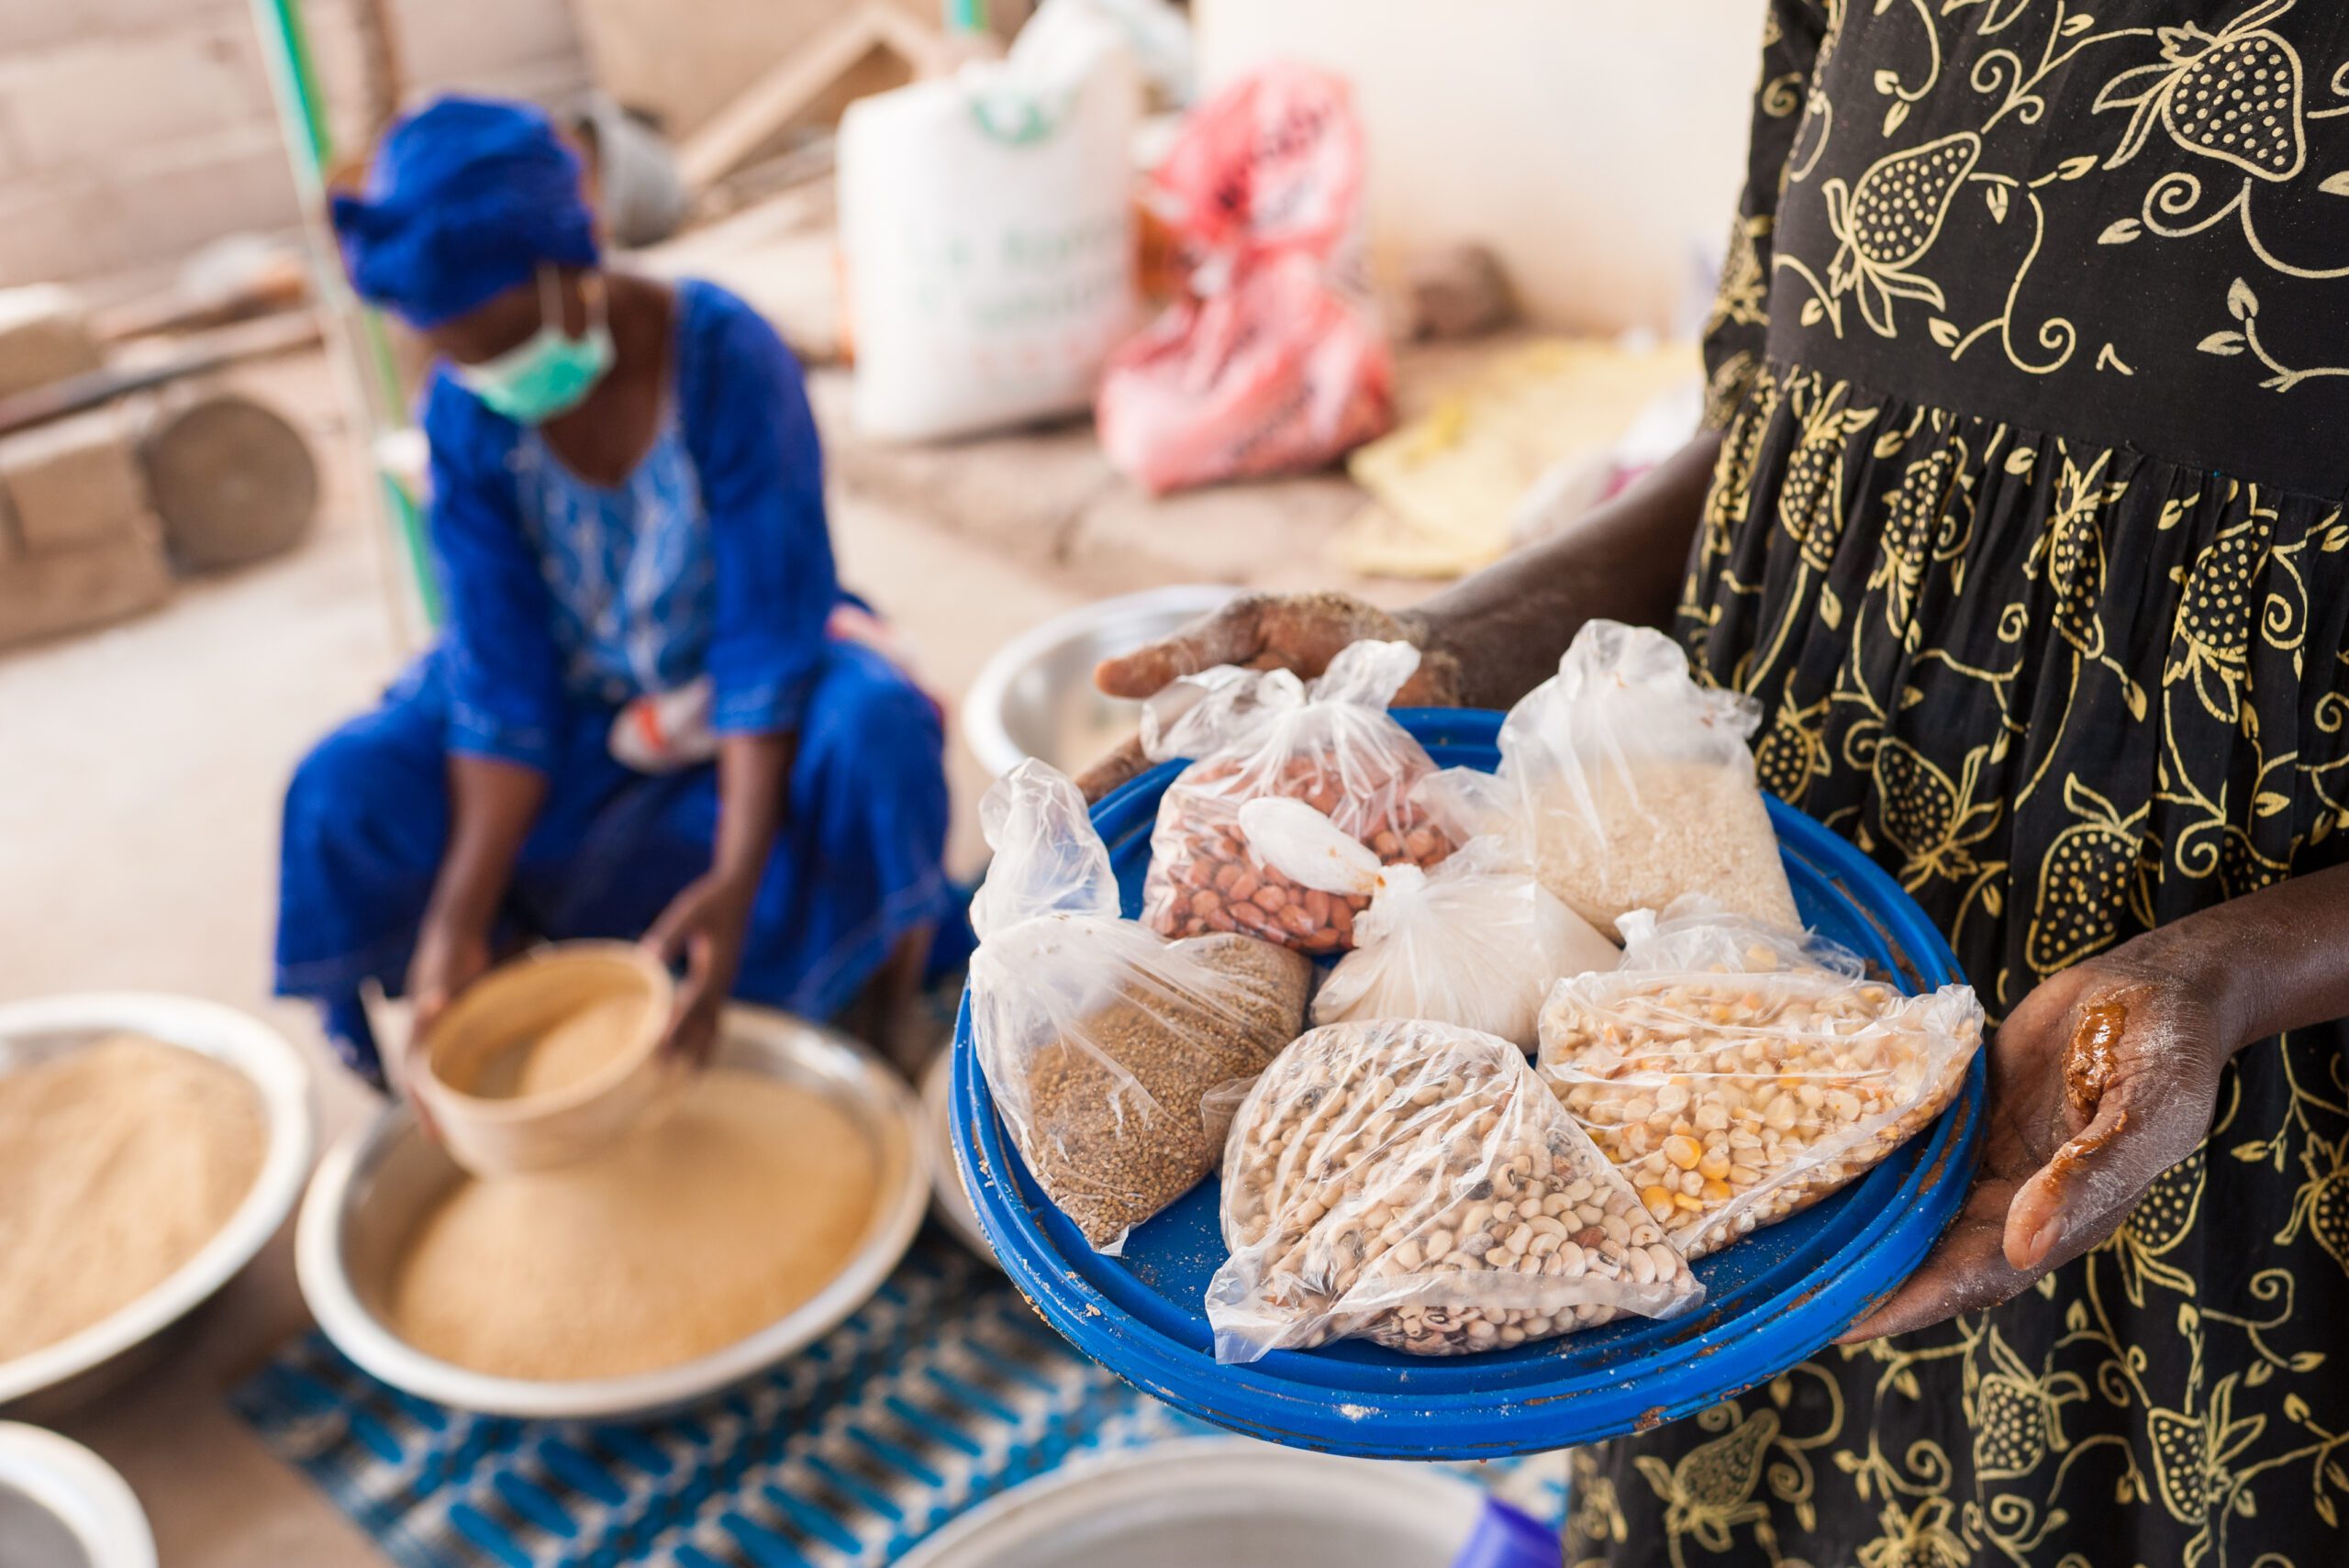 In the foreground, a woman holds a tray the ingredients used to make a nutrient-rich flour blend that is being sifted by the women in the background